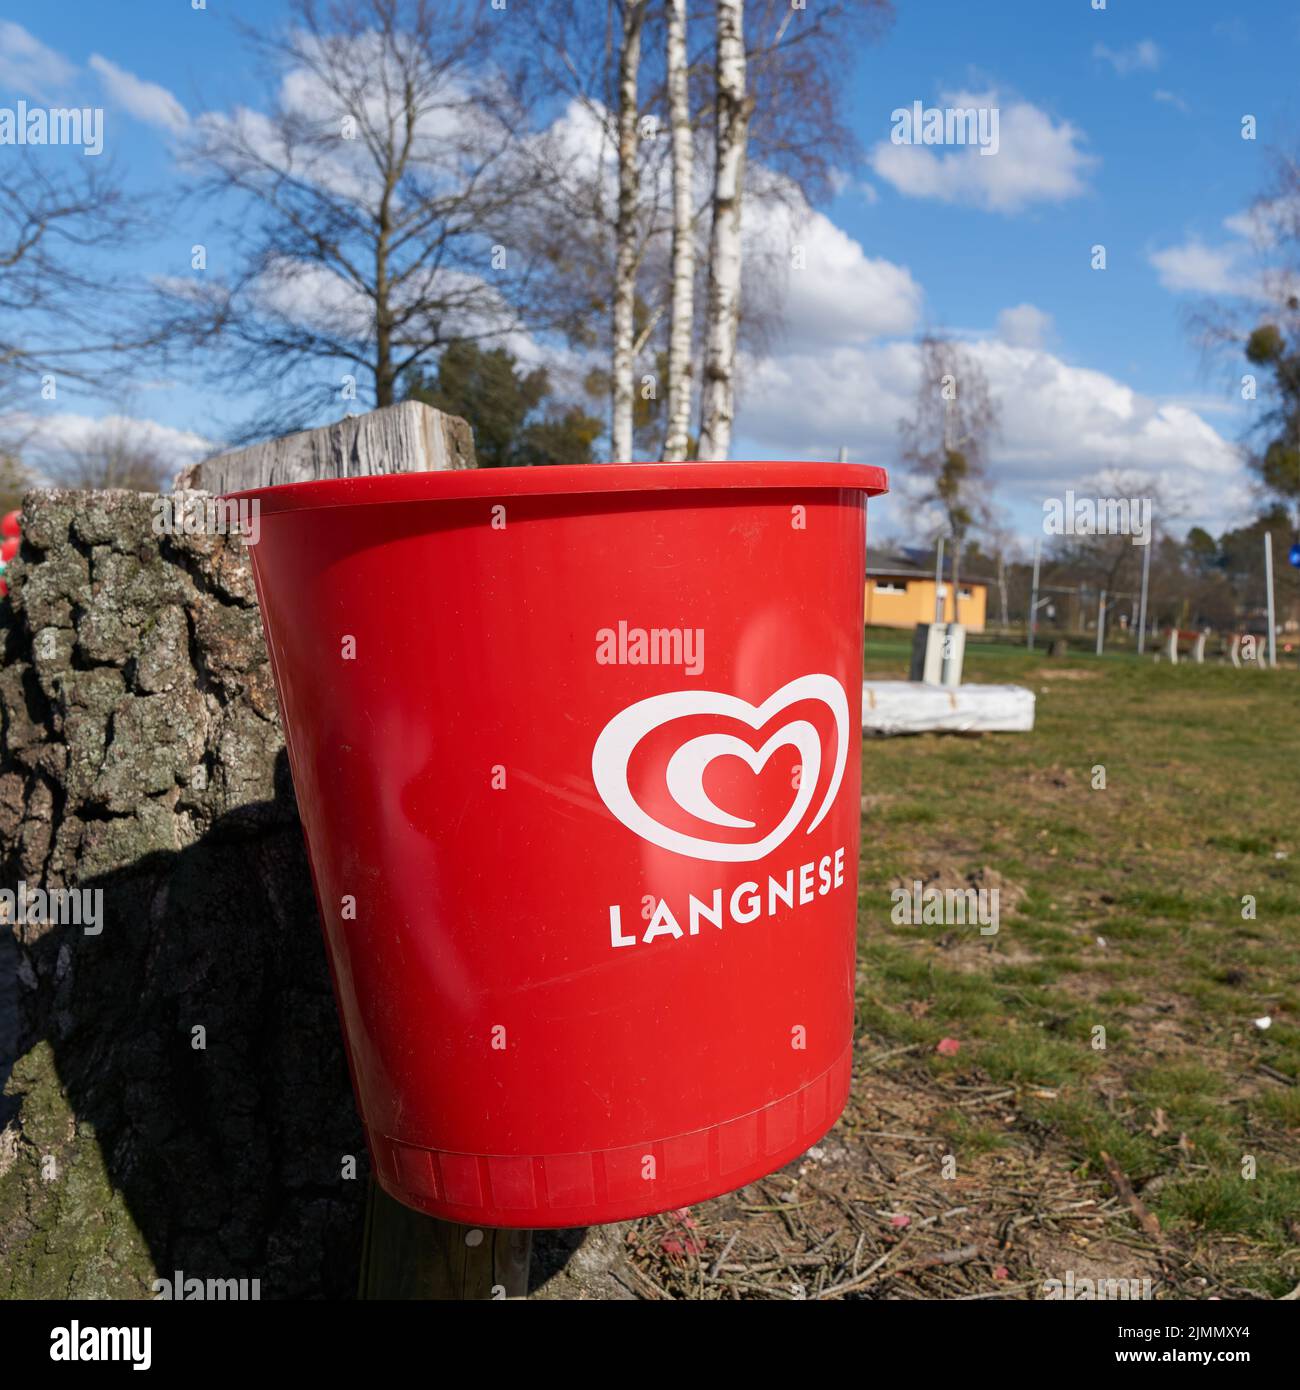 Red trash can of ice cream manufacturer Langnese on a campsite in Germany Stock Photo